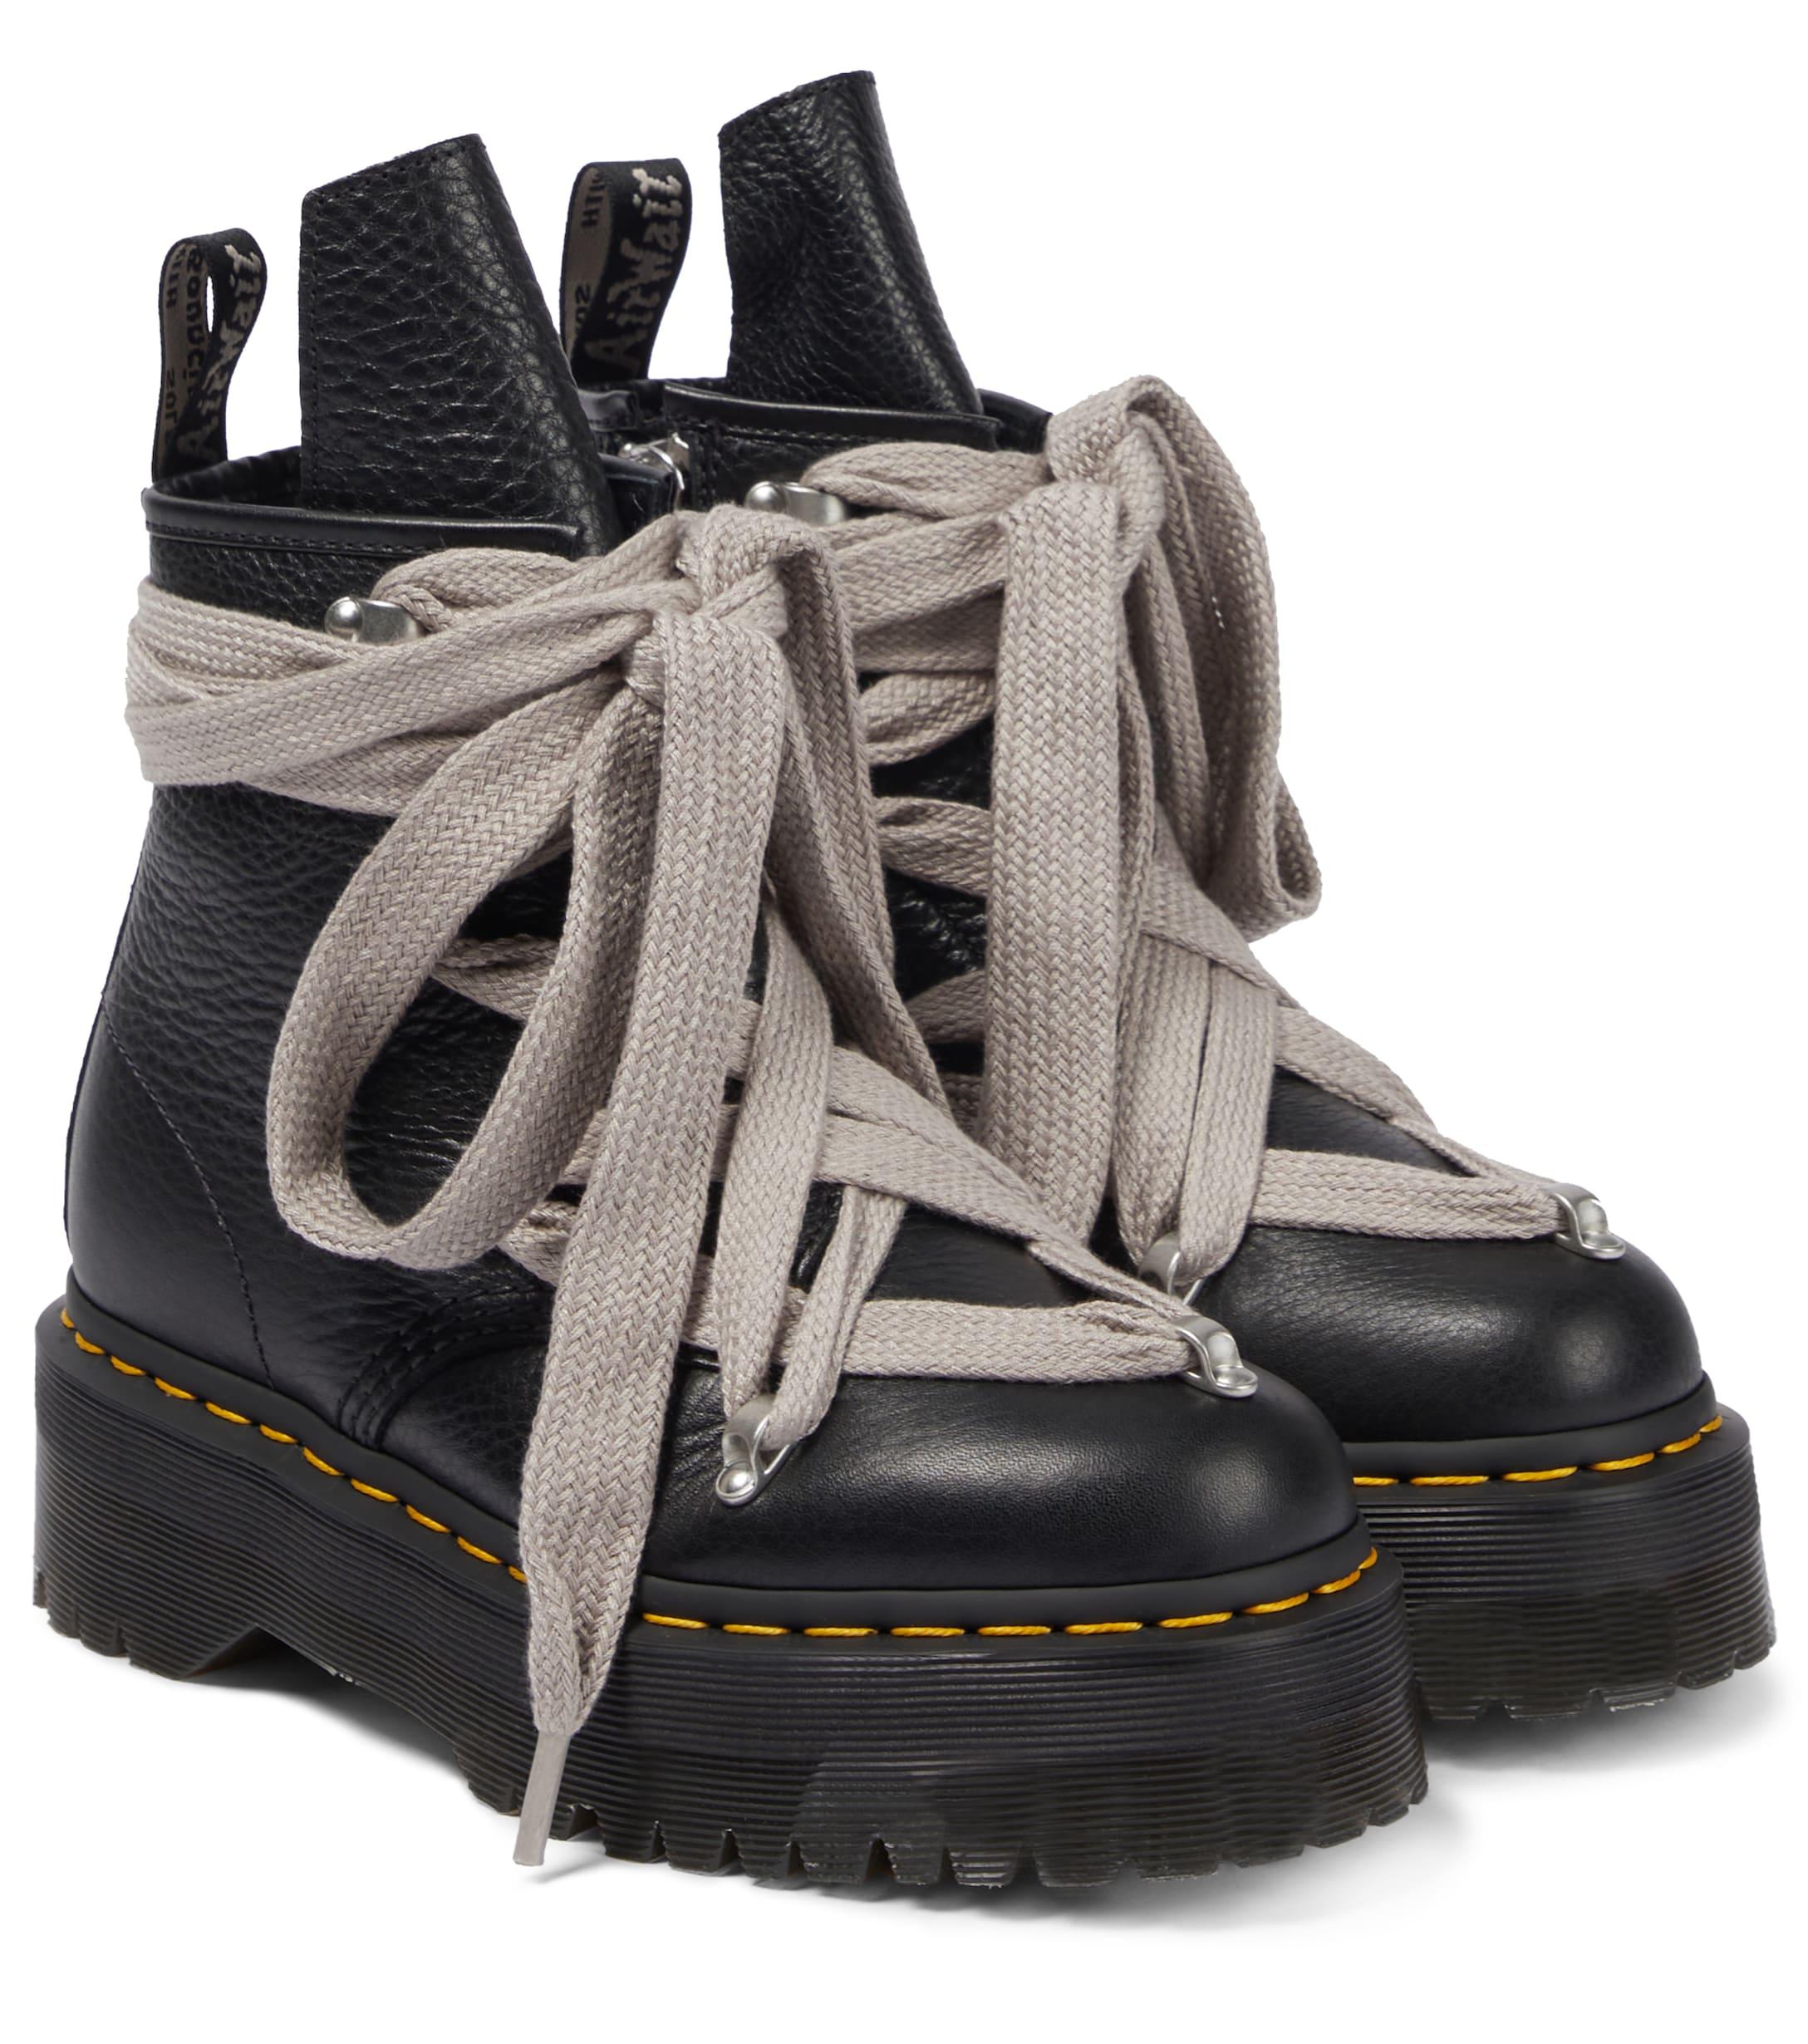 Rick Owens X Dr. Martens Leather Boots in Black | Lyst Australia